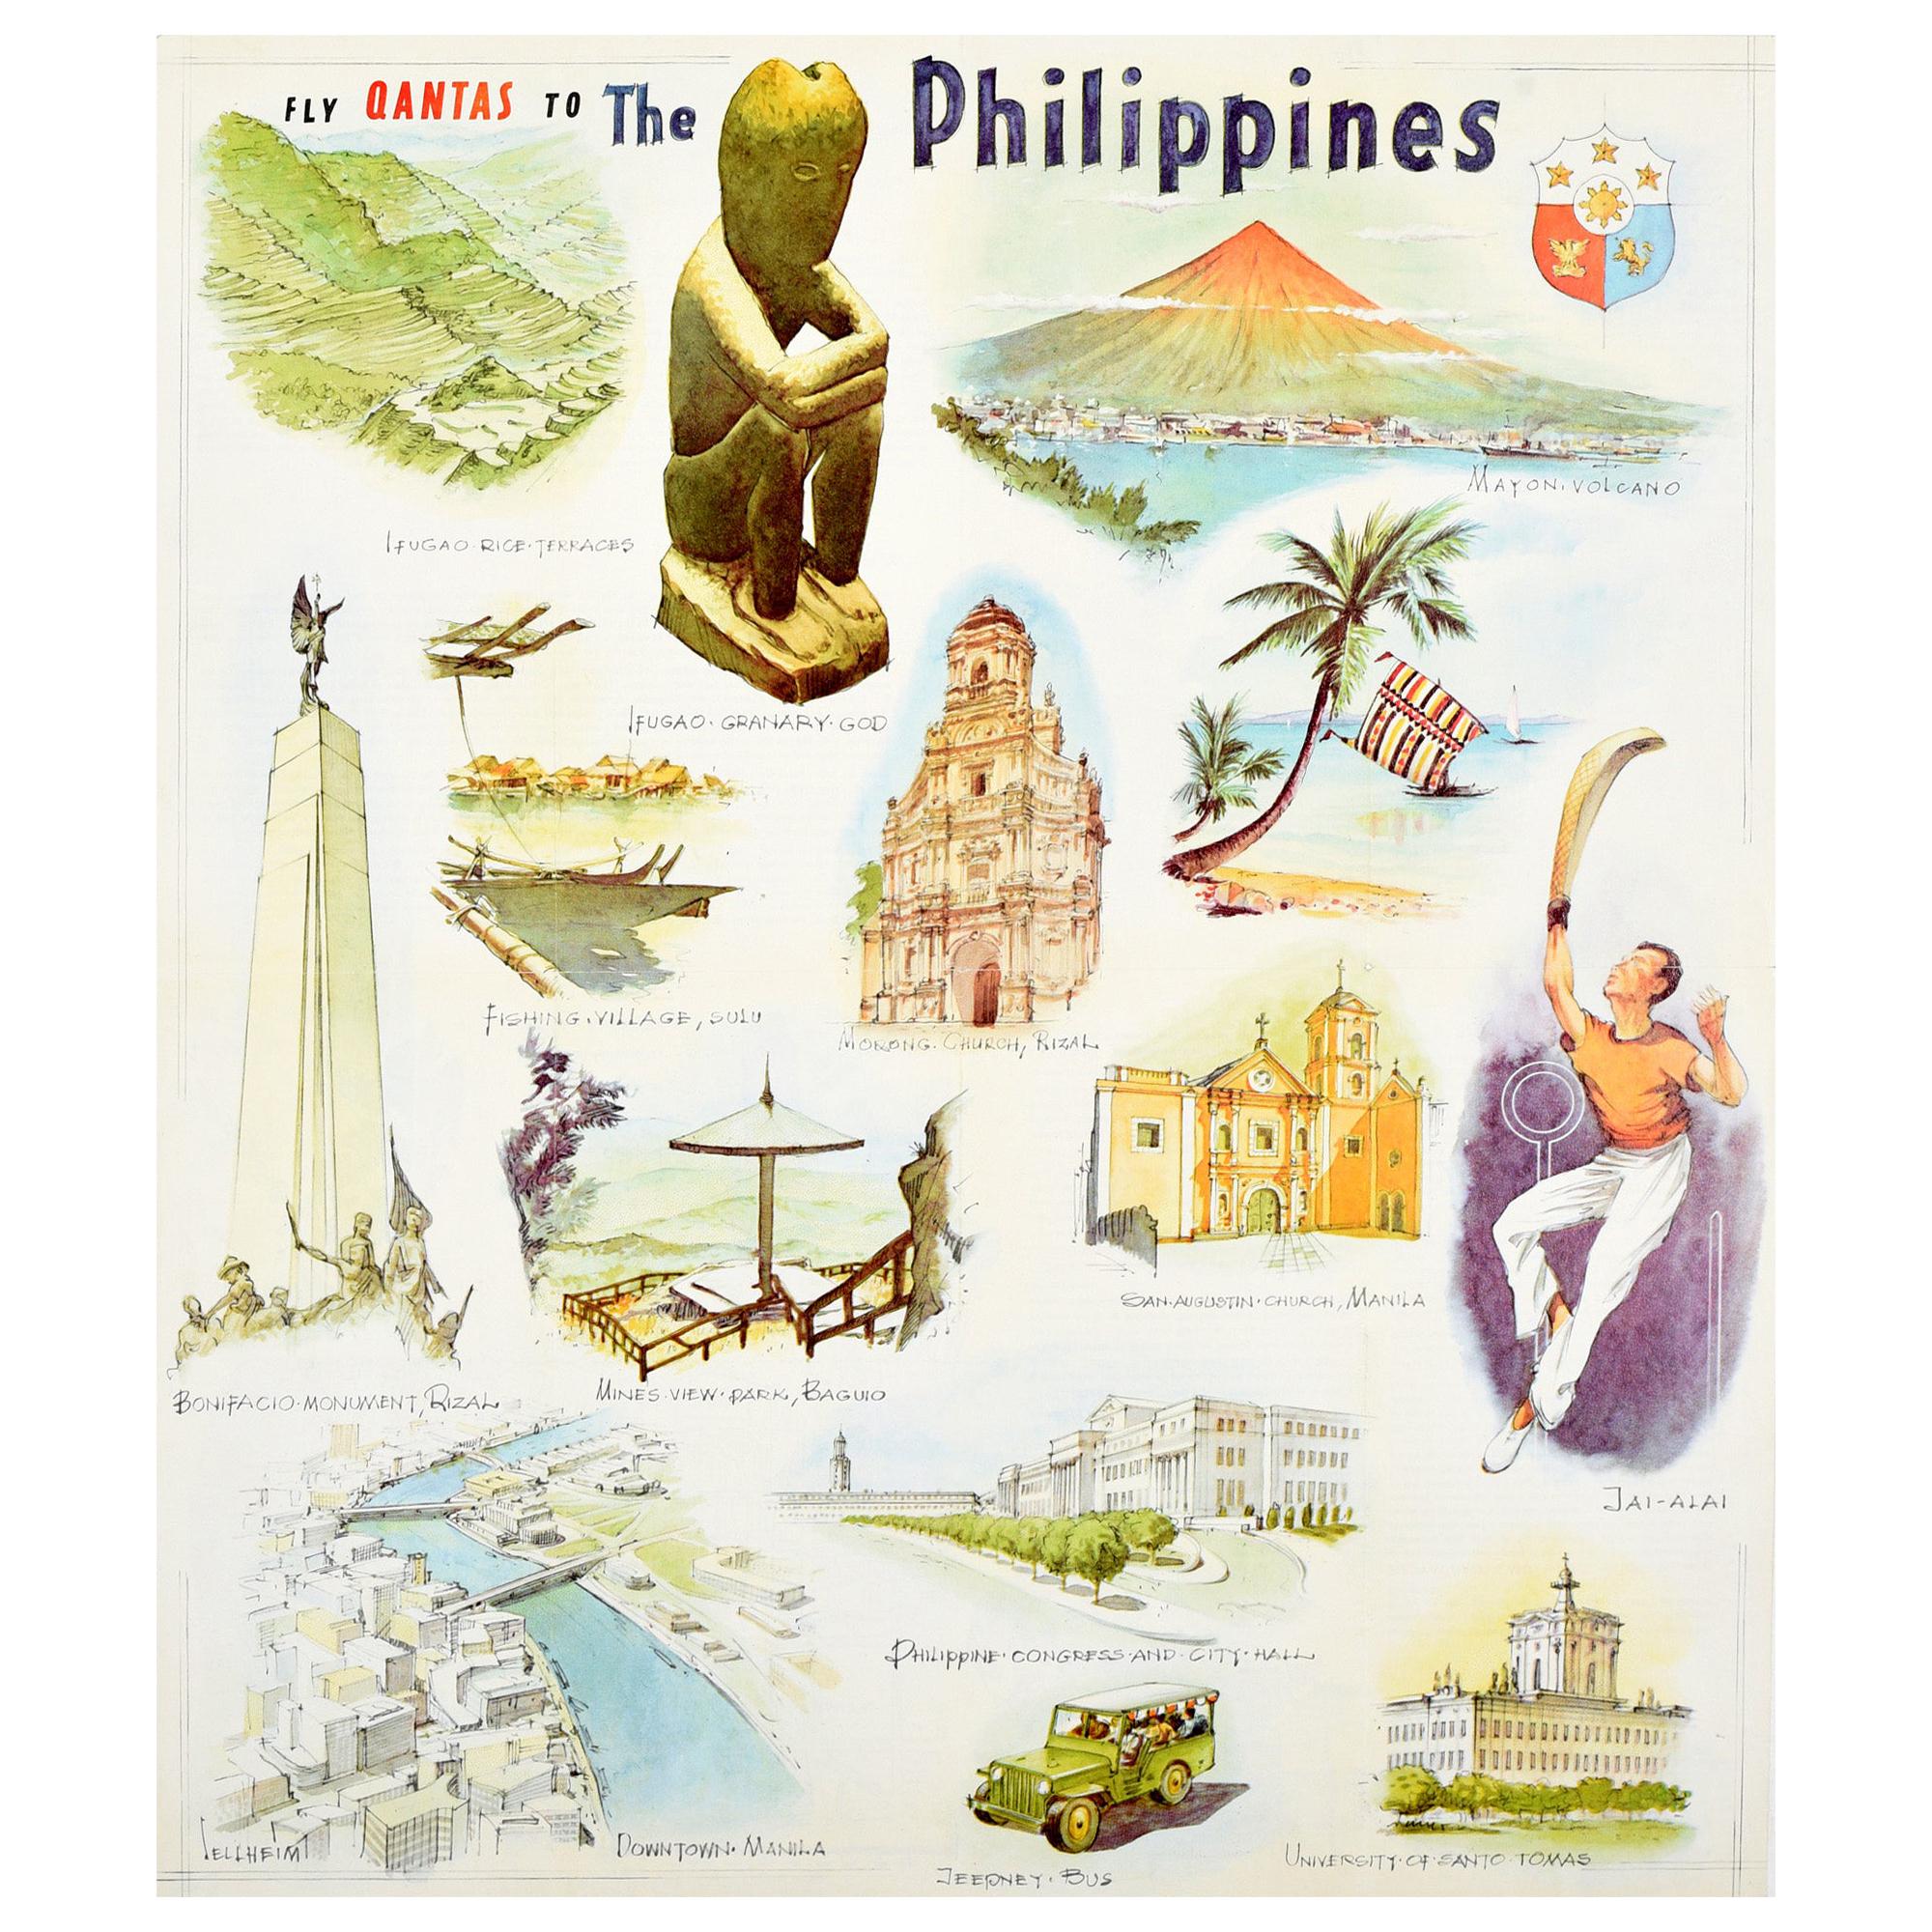 Original Vintage Poster Fly Qantas To The Philippines Travel Art Illustrations For Sale